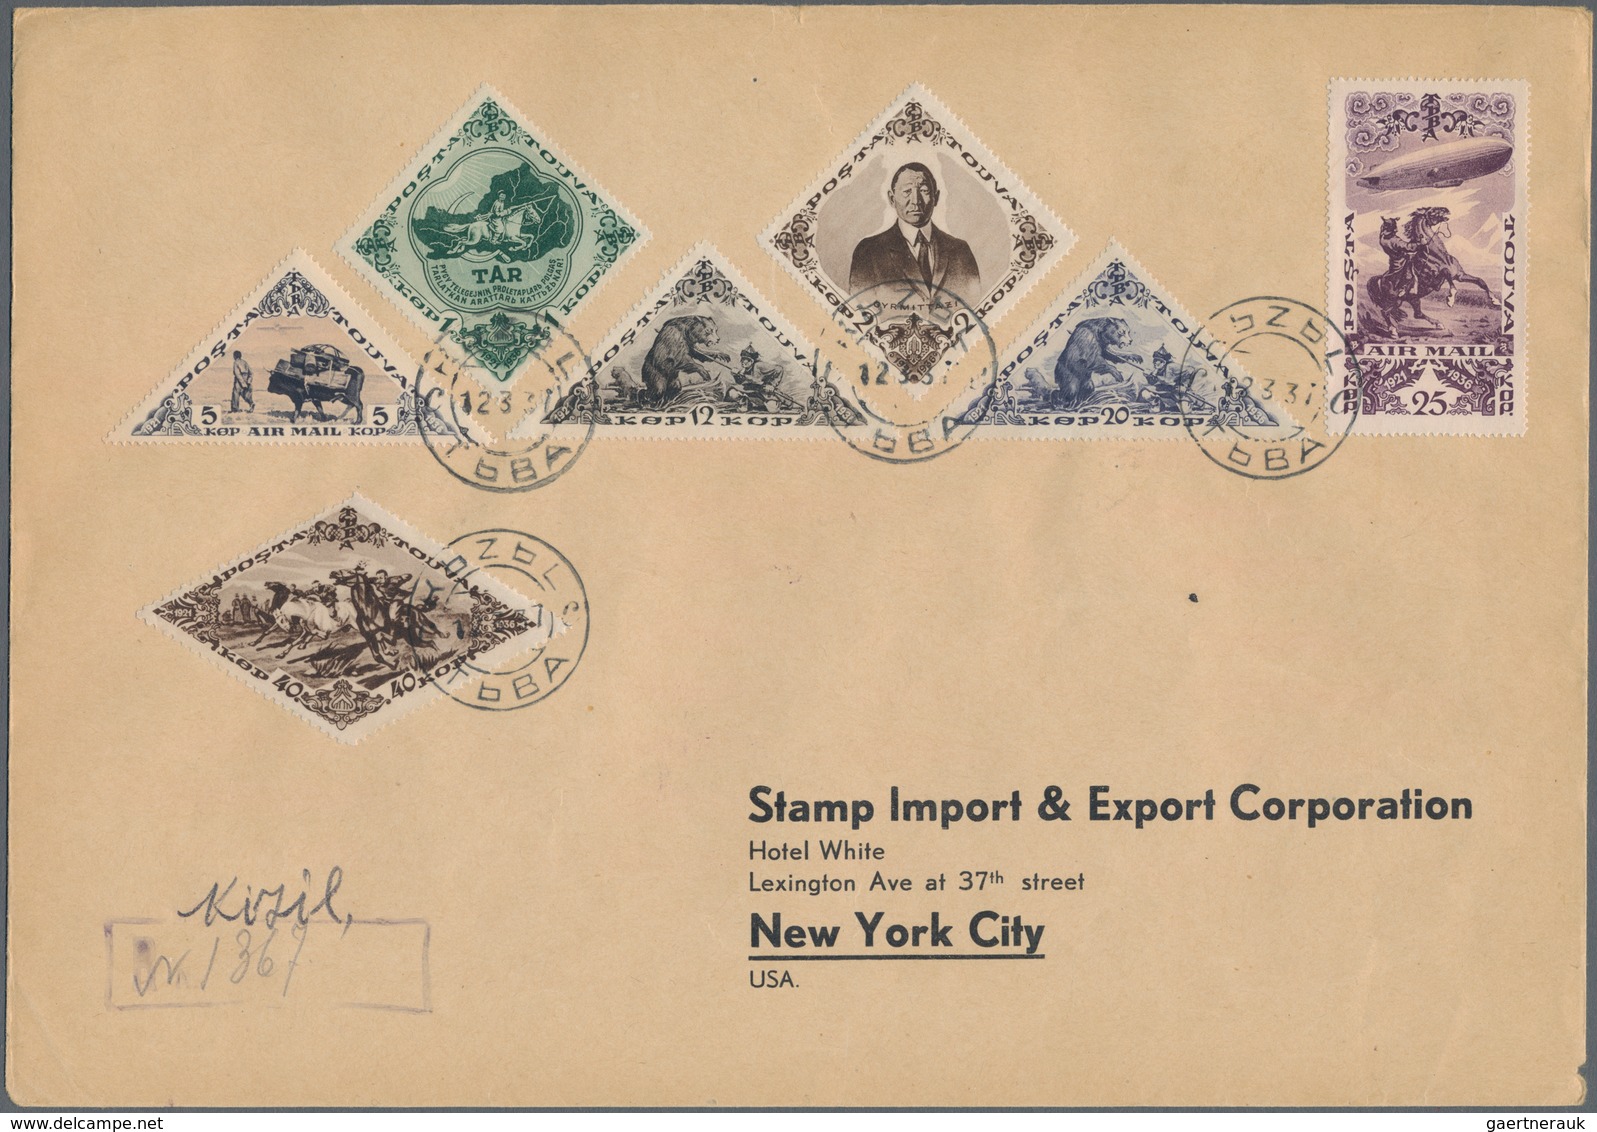 Tannu-Tuwa: 1926-42 Collection of mostly unmounted mint stamps and 6 covers on printed pages, starti